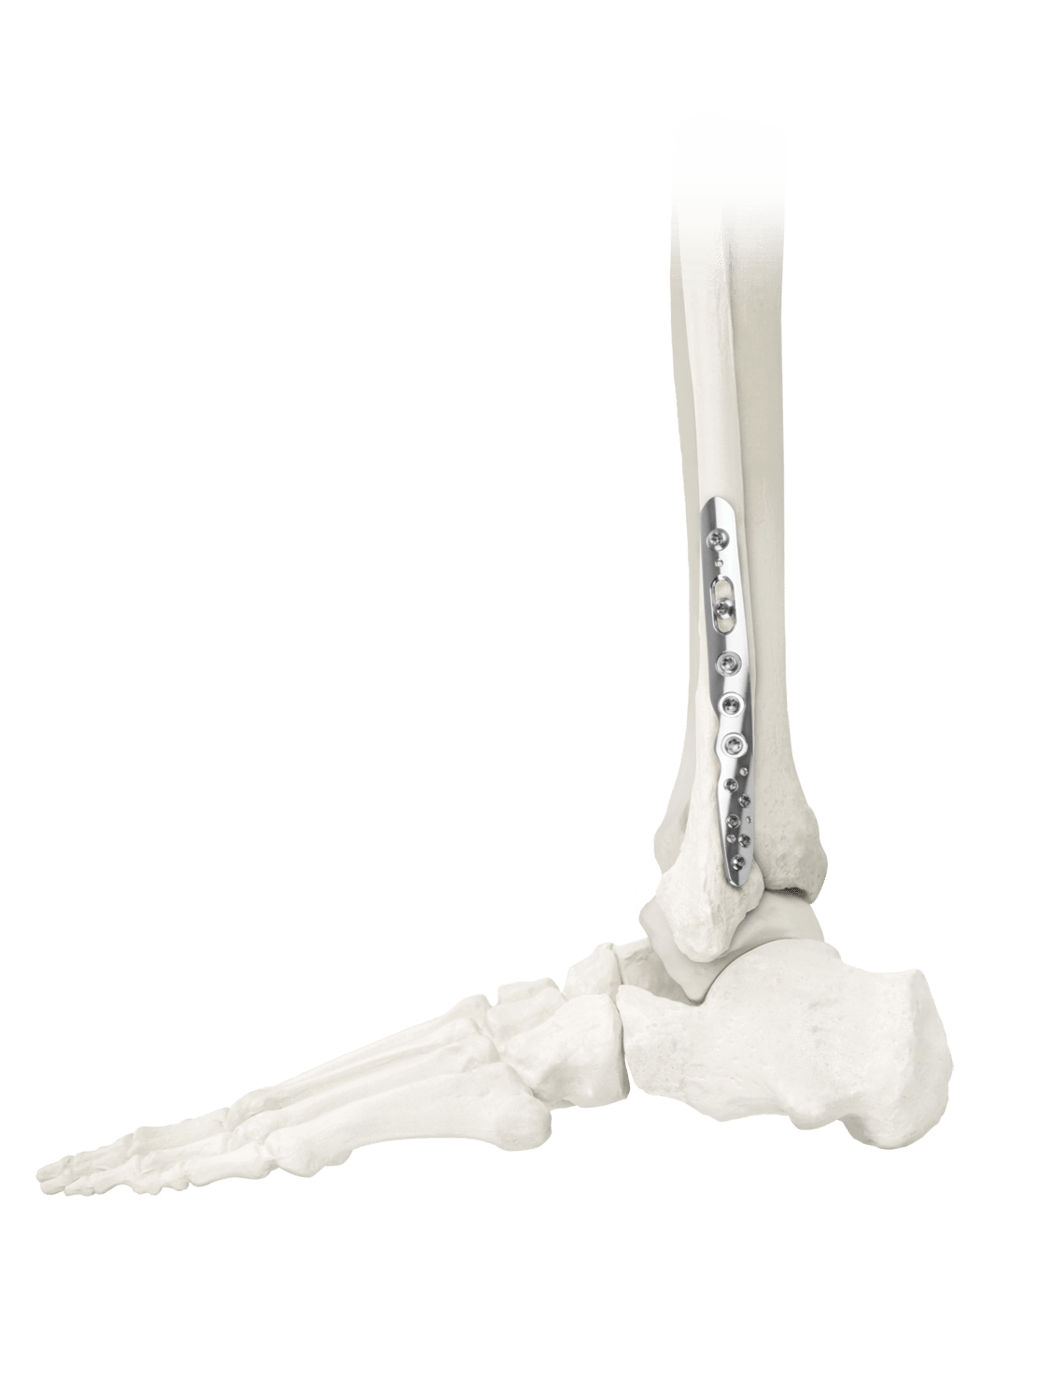 ANTHEM® Ankle Fracture System Final Construct